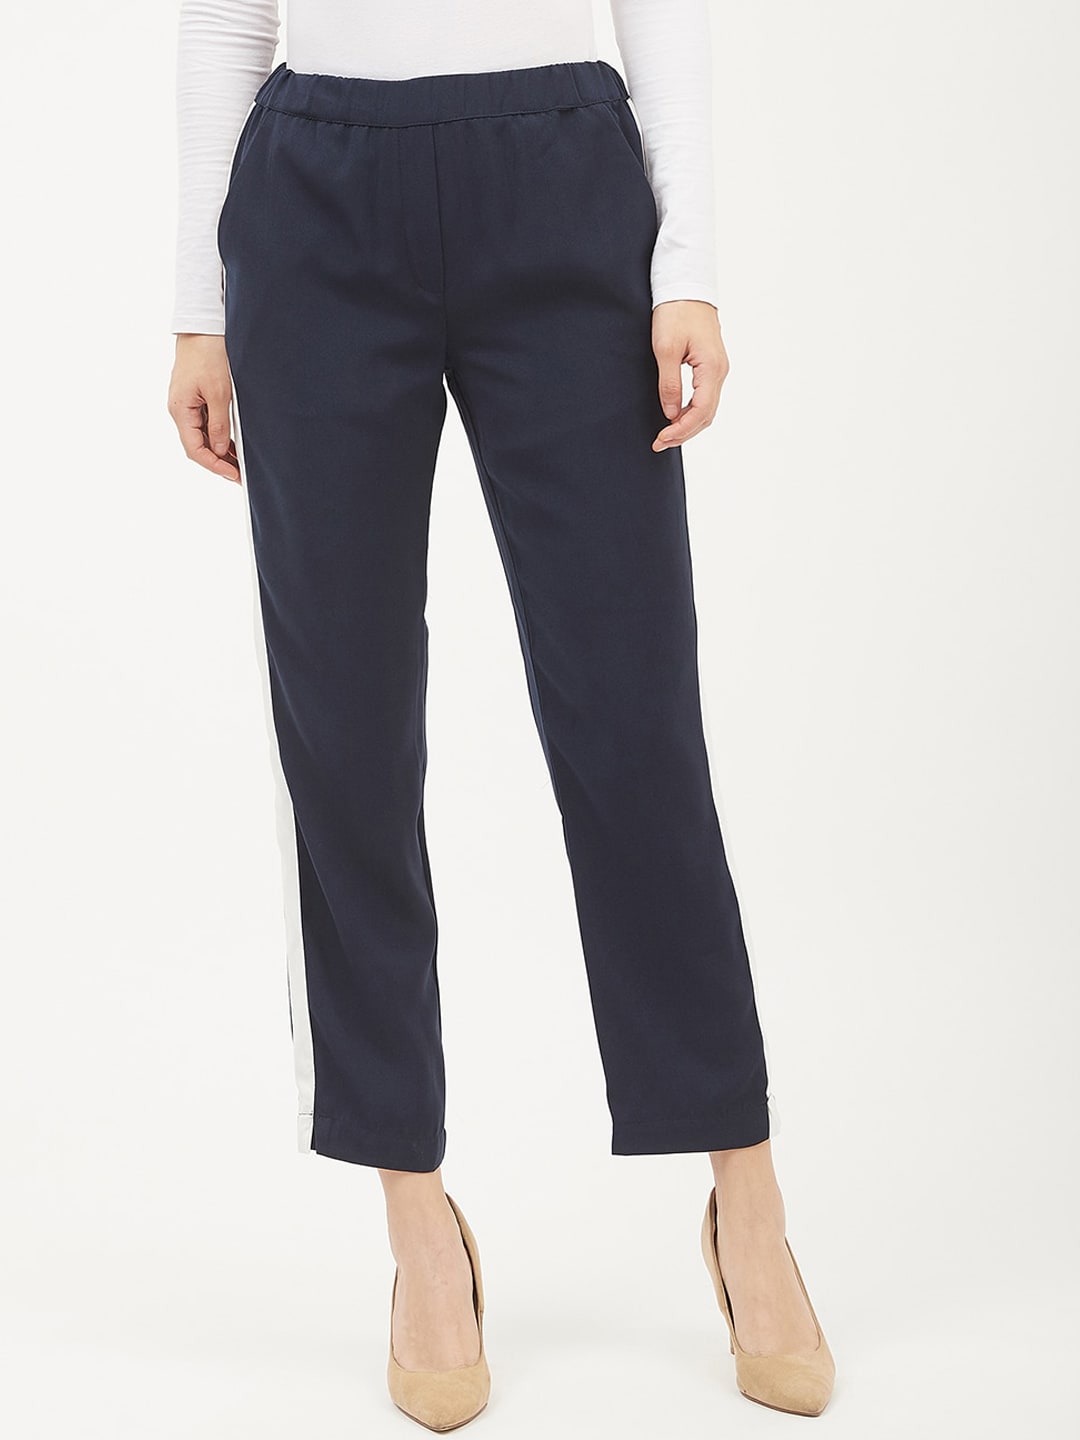 Harpa Women Navy Blue Smart Regular Fit Solid Regular Trousers Price in India